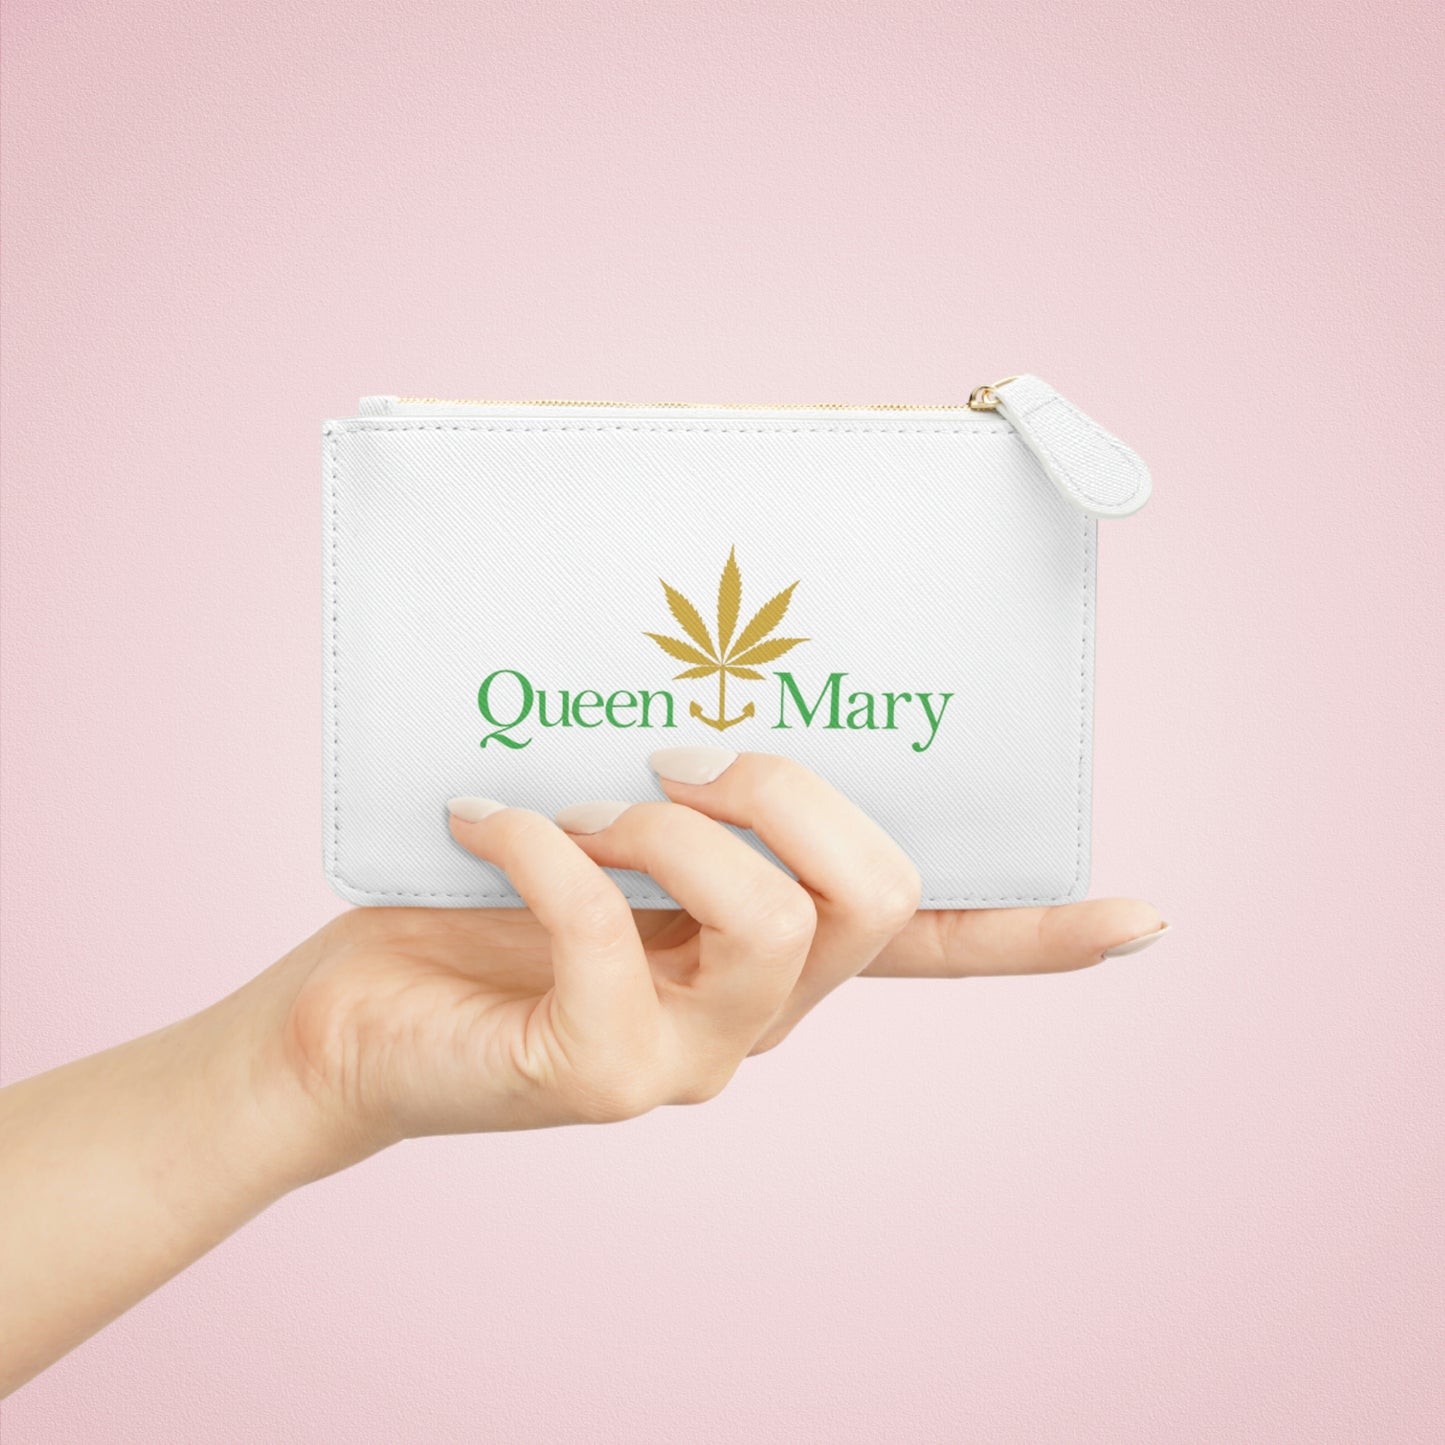 Leather Mini Clutch Bag by Queen Mary